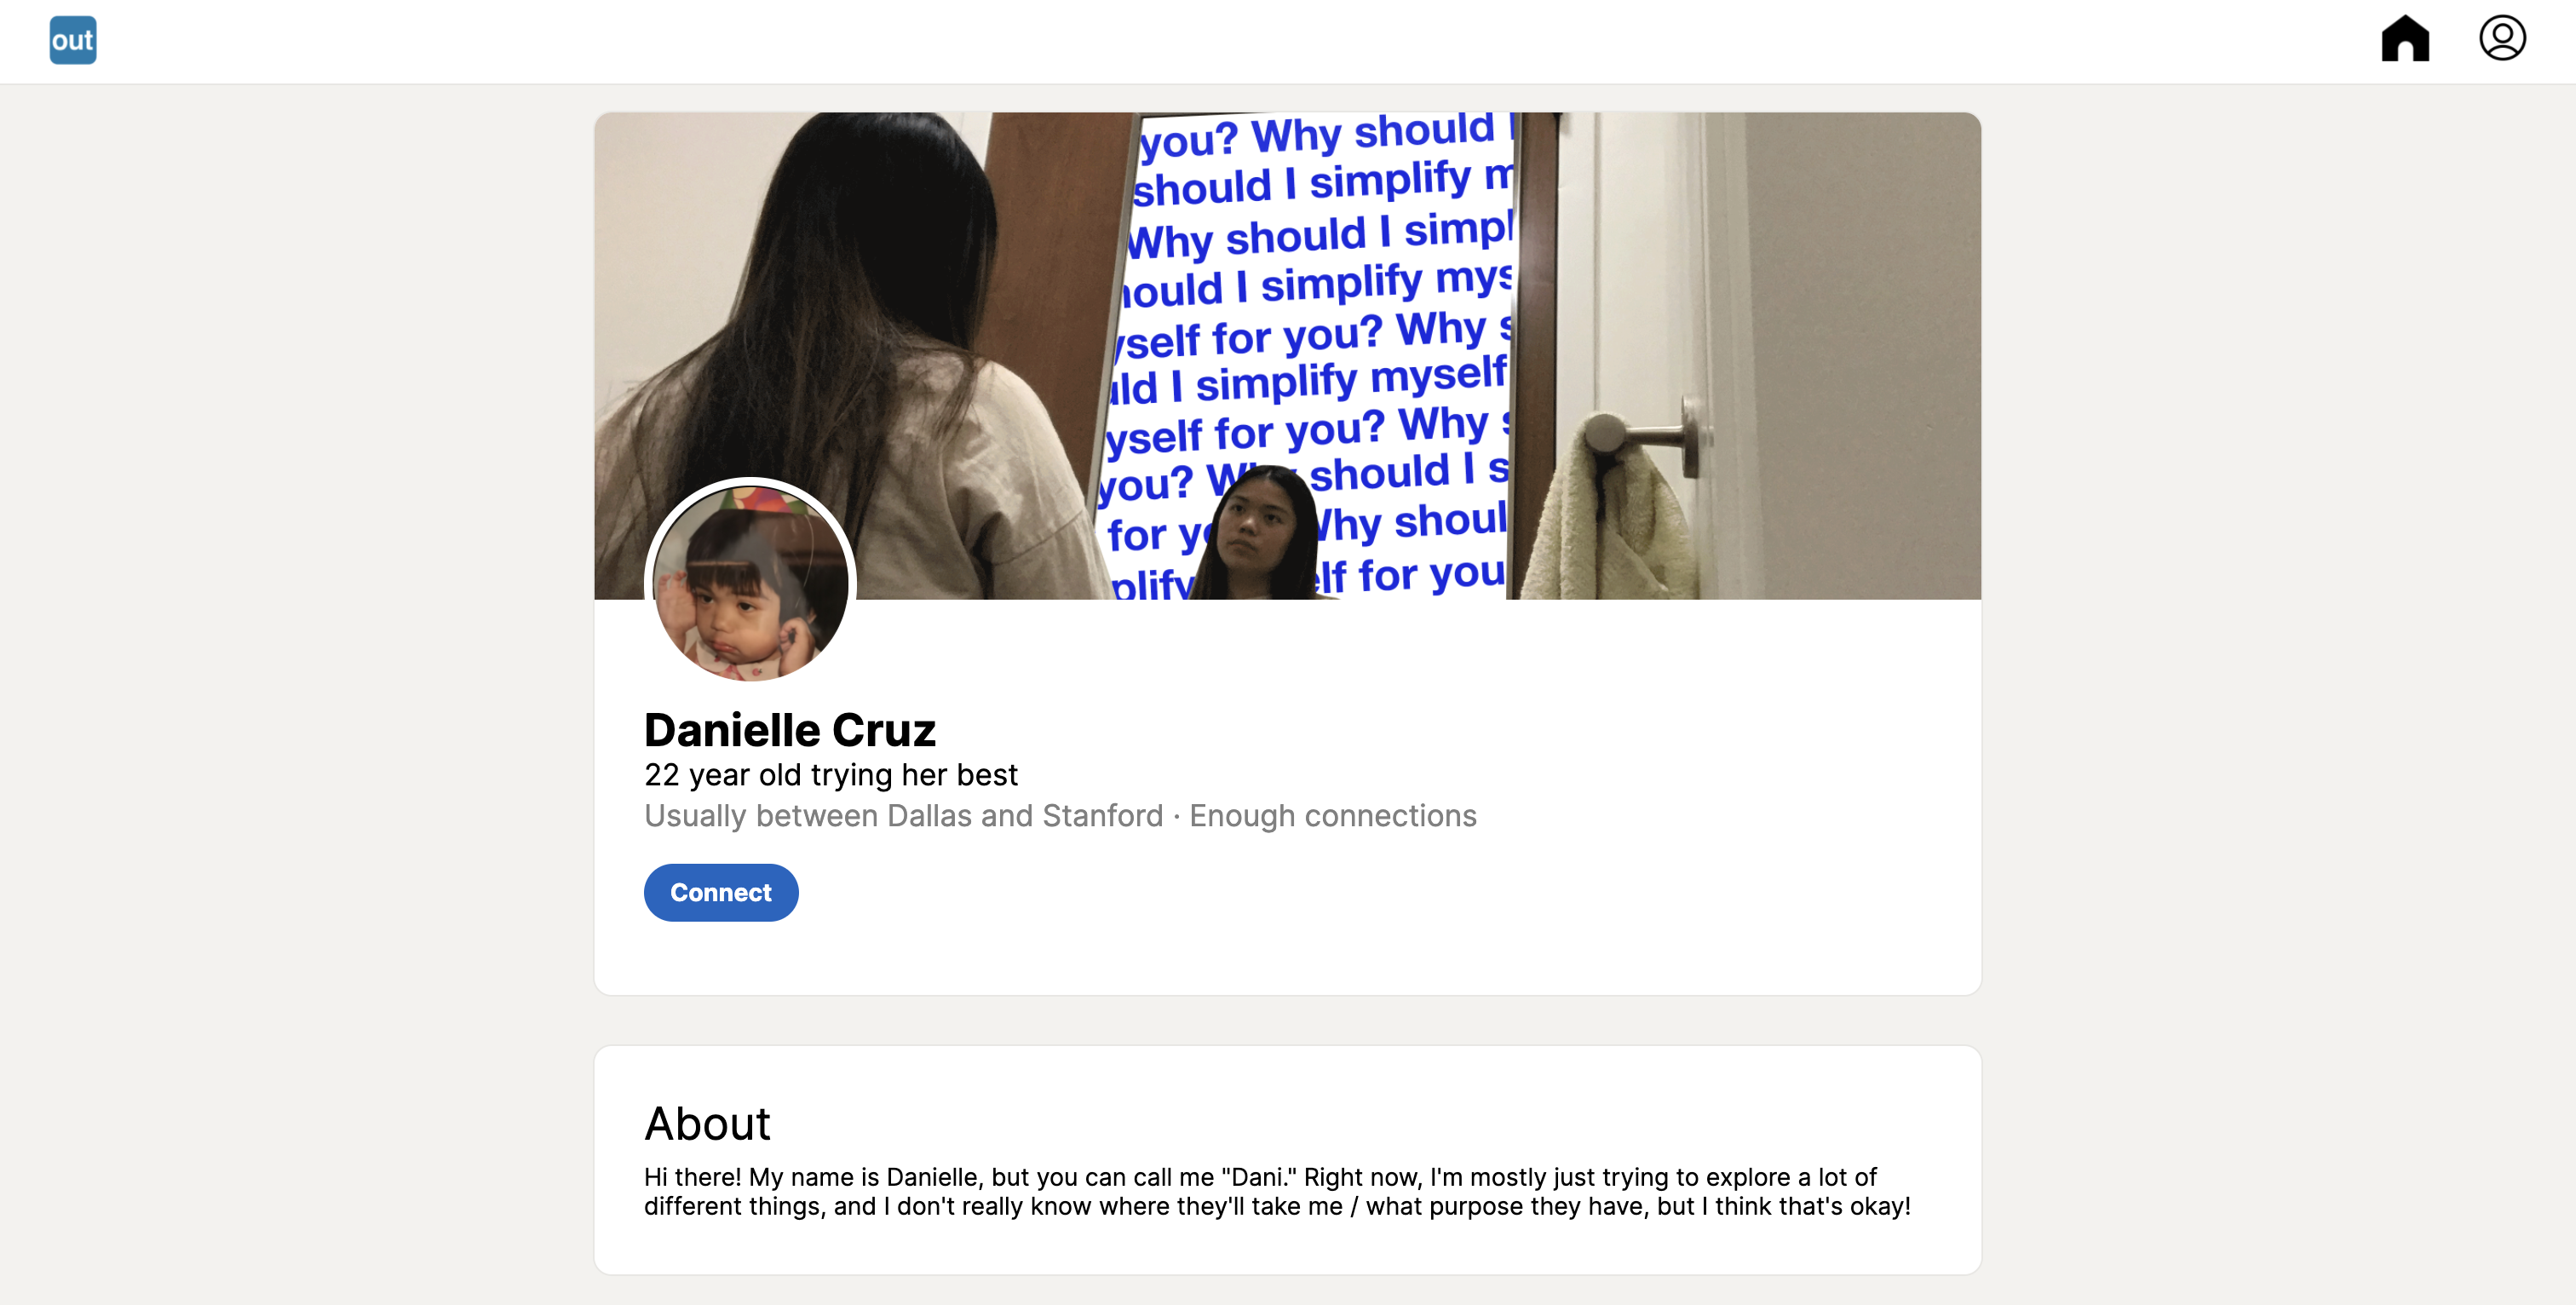 An interface designed to resemble LinkedIn with a cover photo of a woman staring at herself in a mirror.